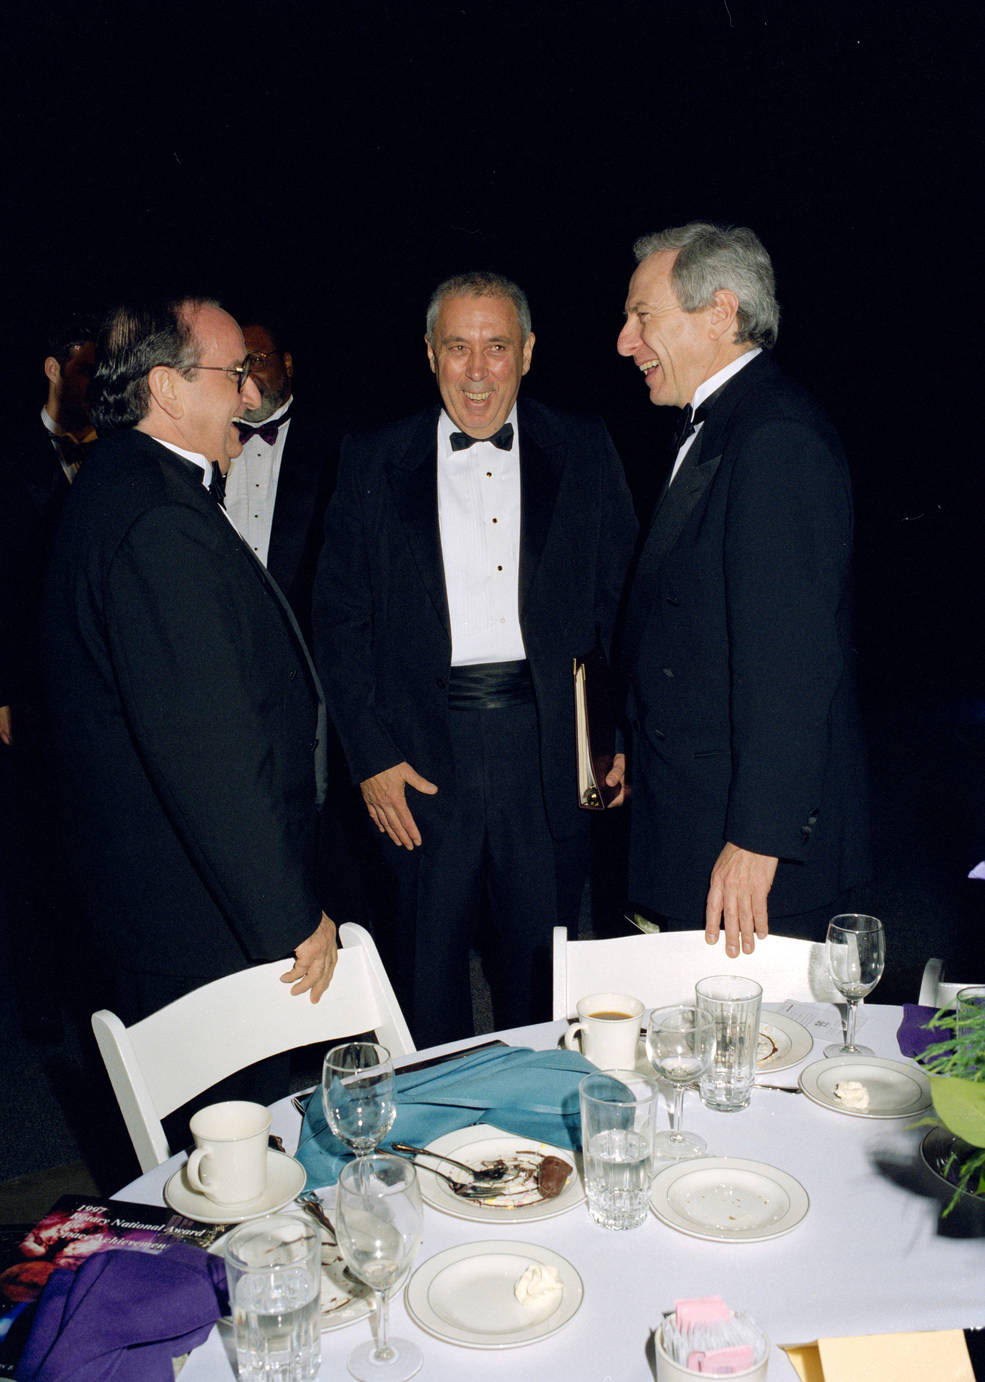 abbey_at_rotary_awards_dinner_w_goldin_and_restaurateur_giuseppe_camera_mar_11_1997